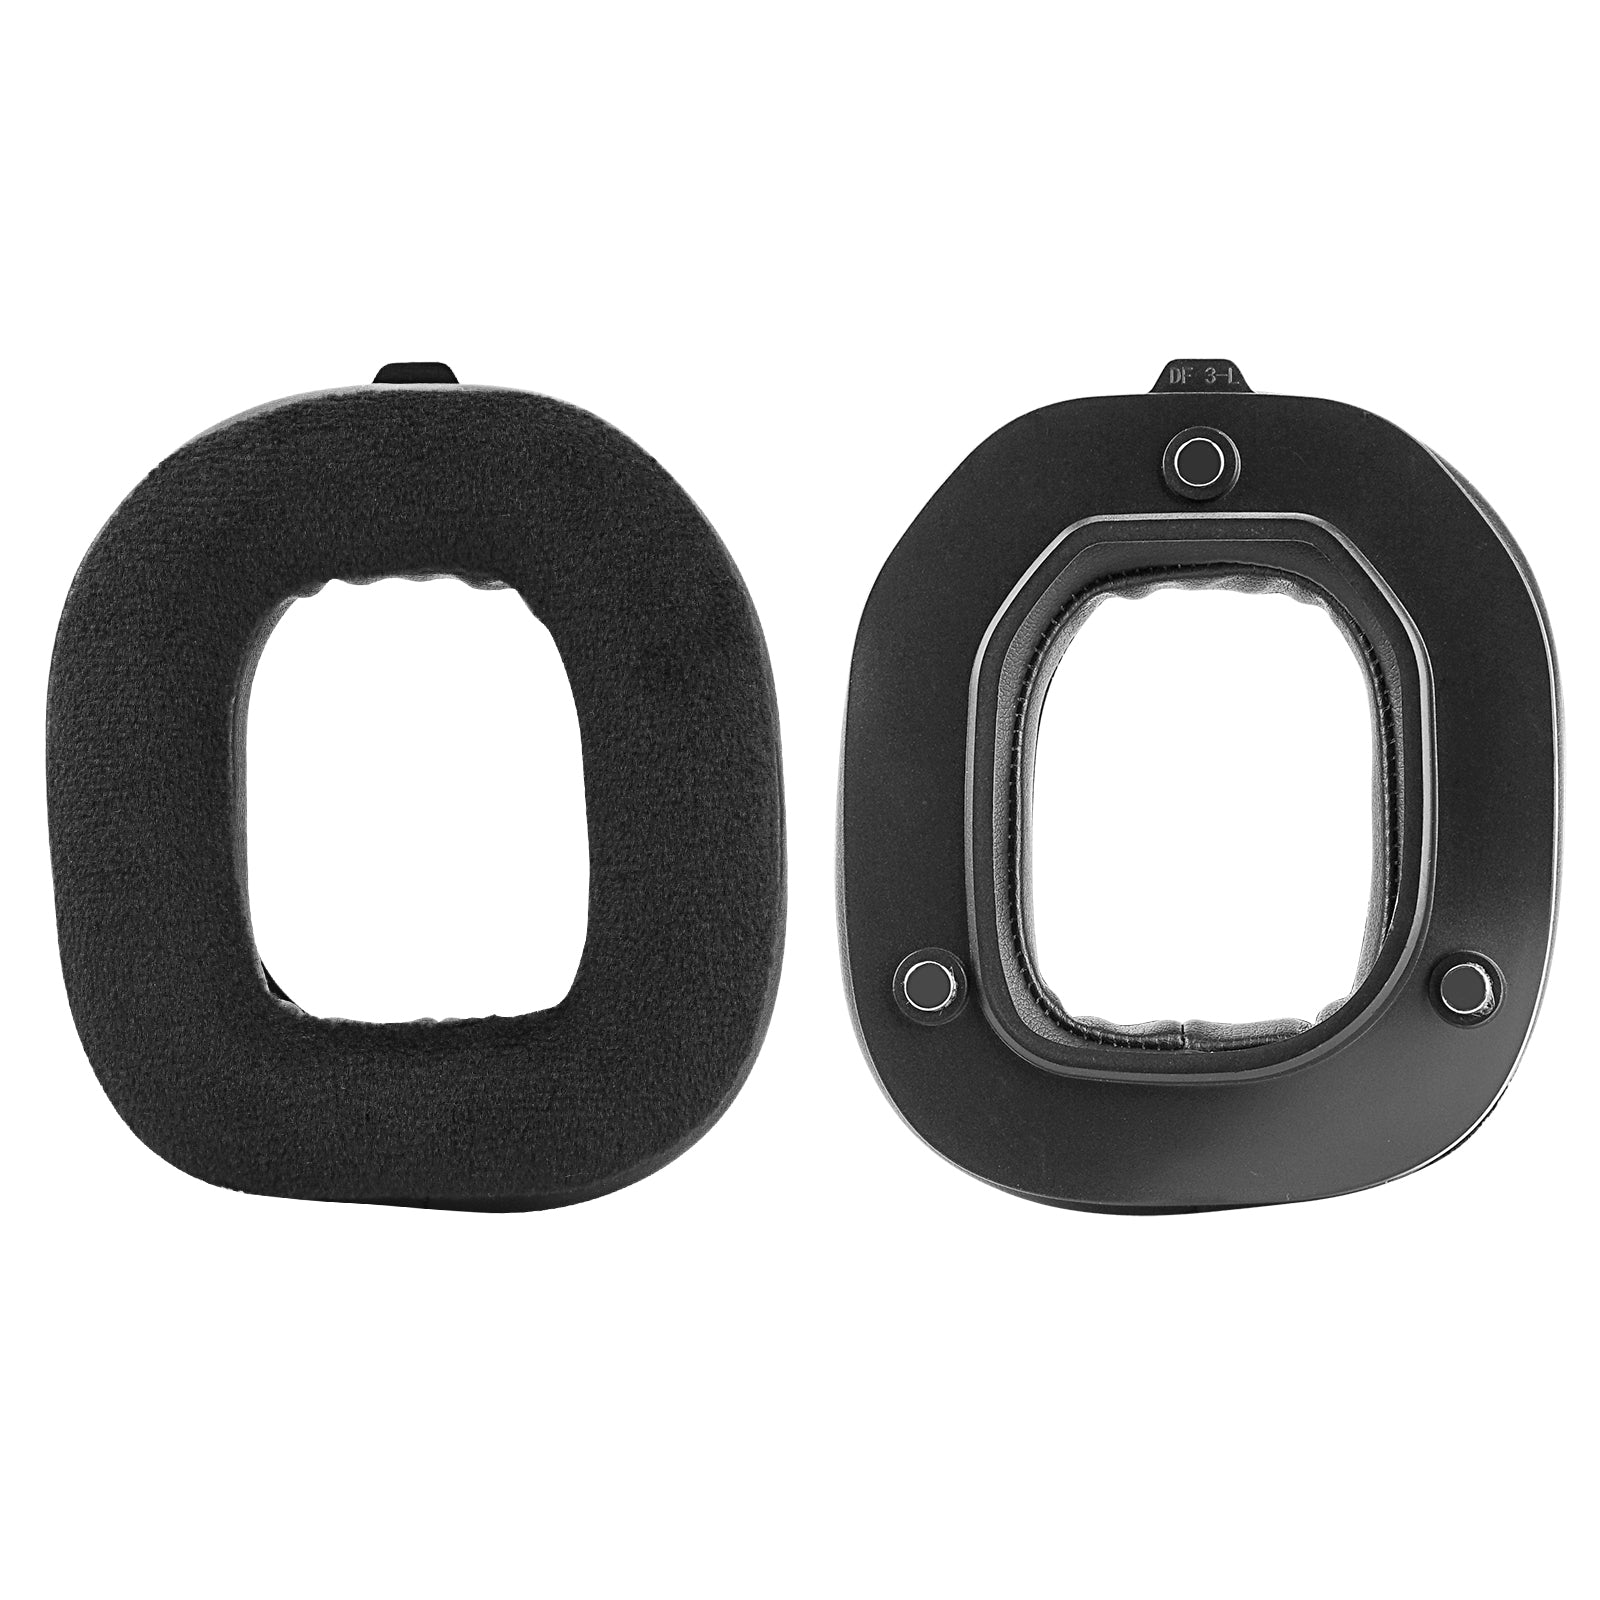 Astro A50 Replacement Earpads for Astro A50 GEN4 Gaming Headset - Astro a50  mod kit/Astro a50 Accessories (Velour)